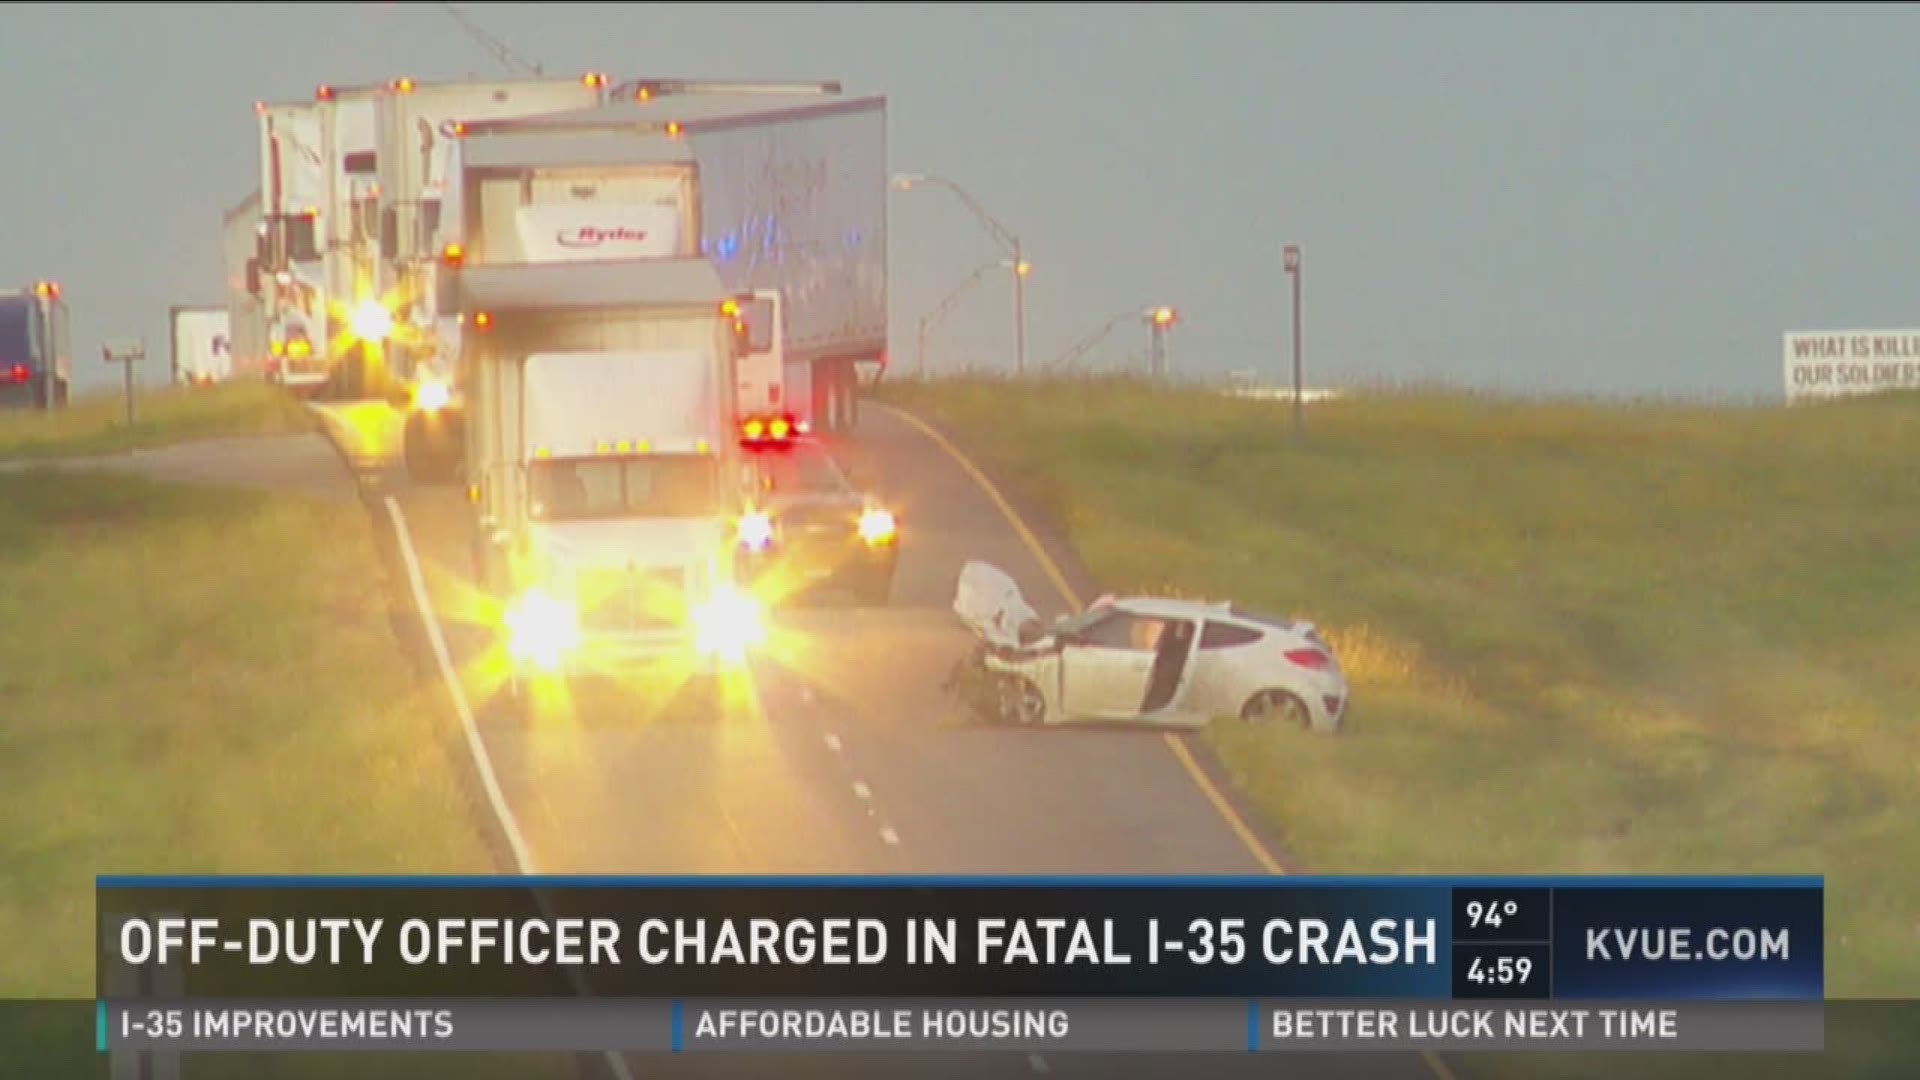 An off-duty police officer is facing charges for a fatal crash on I-35 in Jarrell.